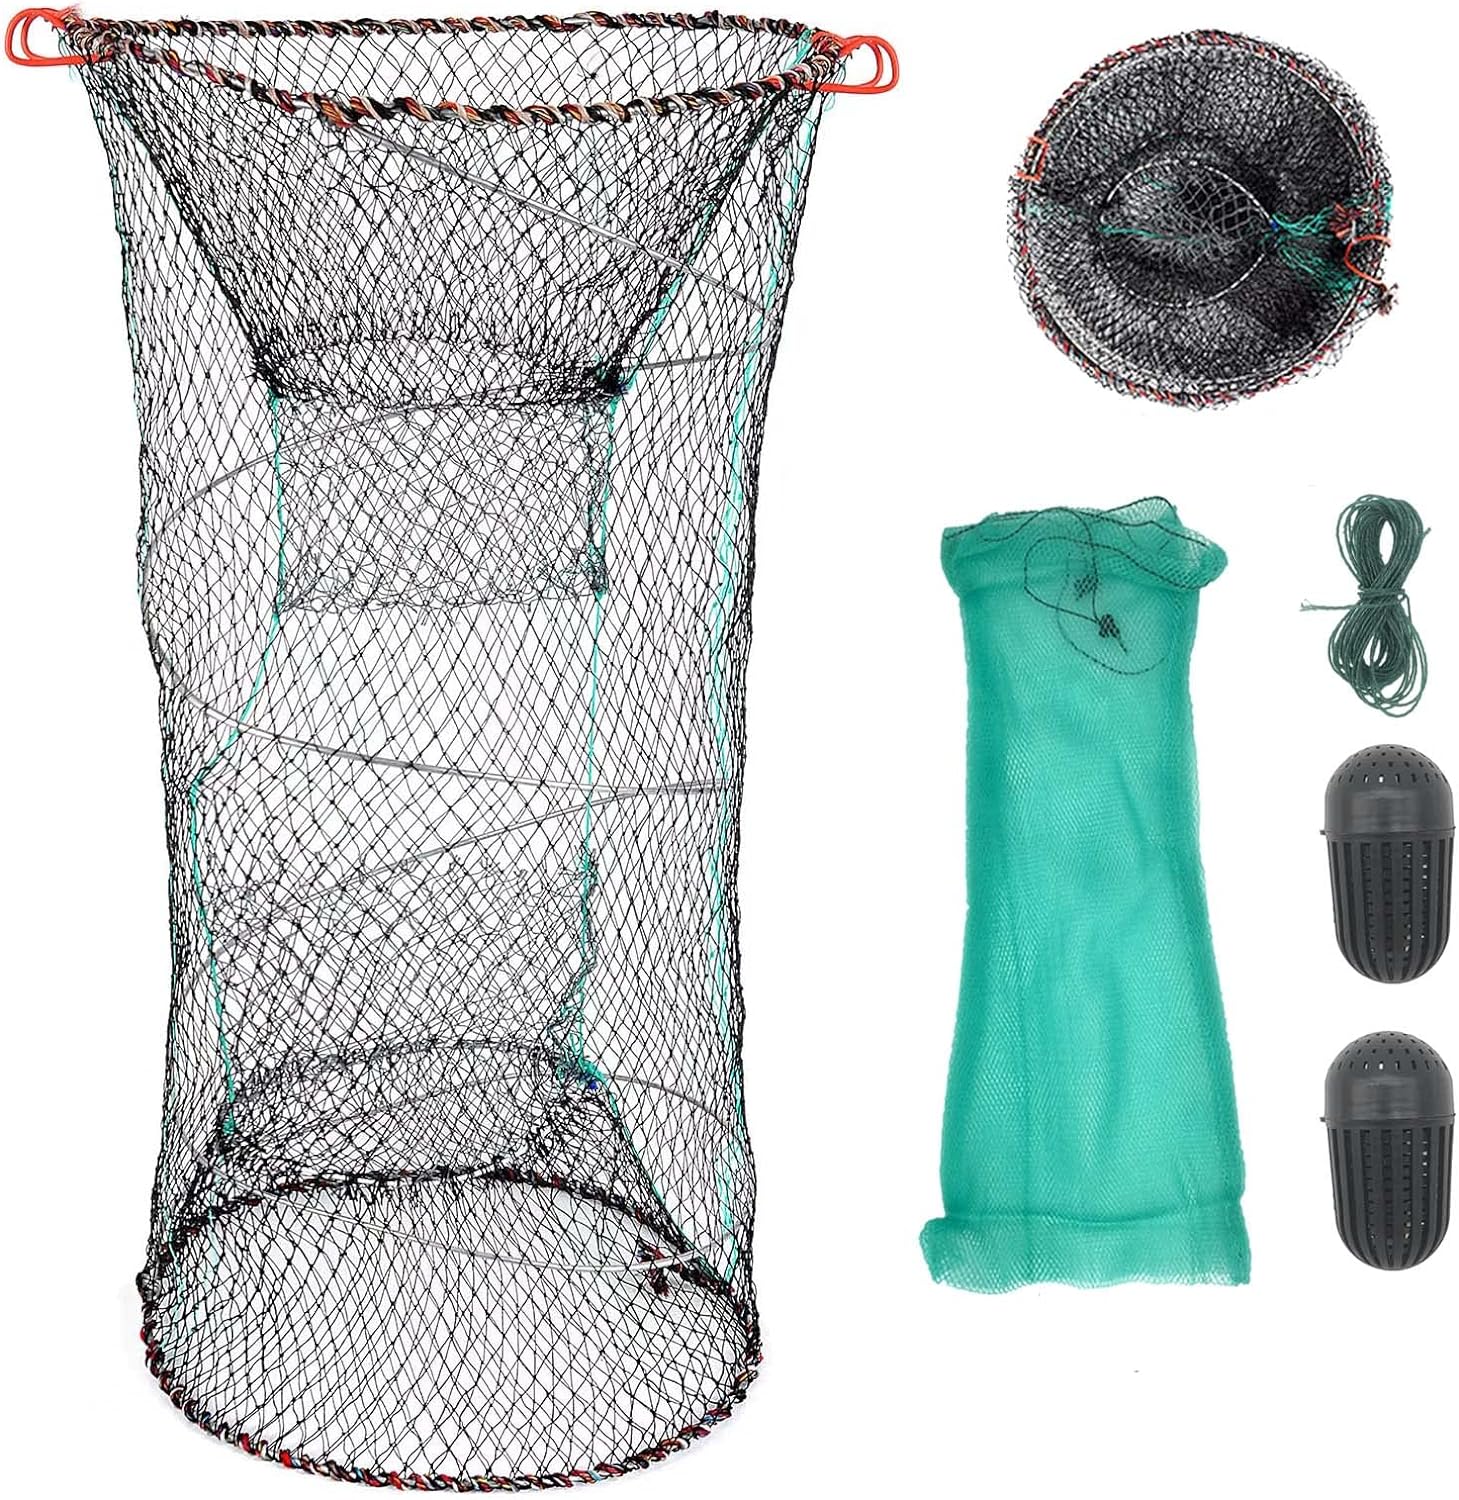 SHWMQJ Crab Trap: A Reliable Catch for Anglers